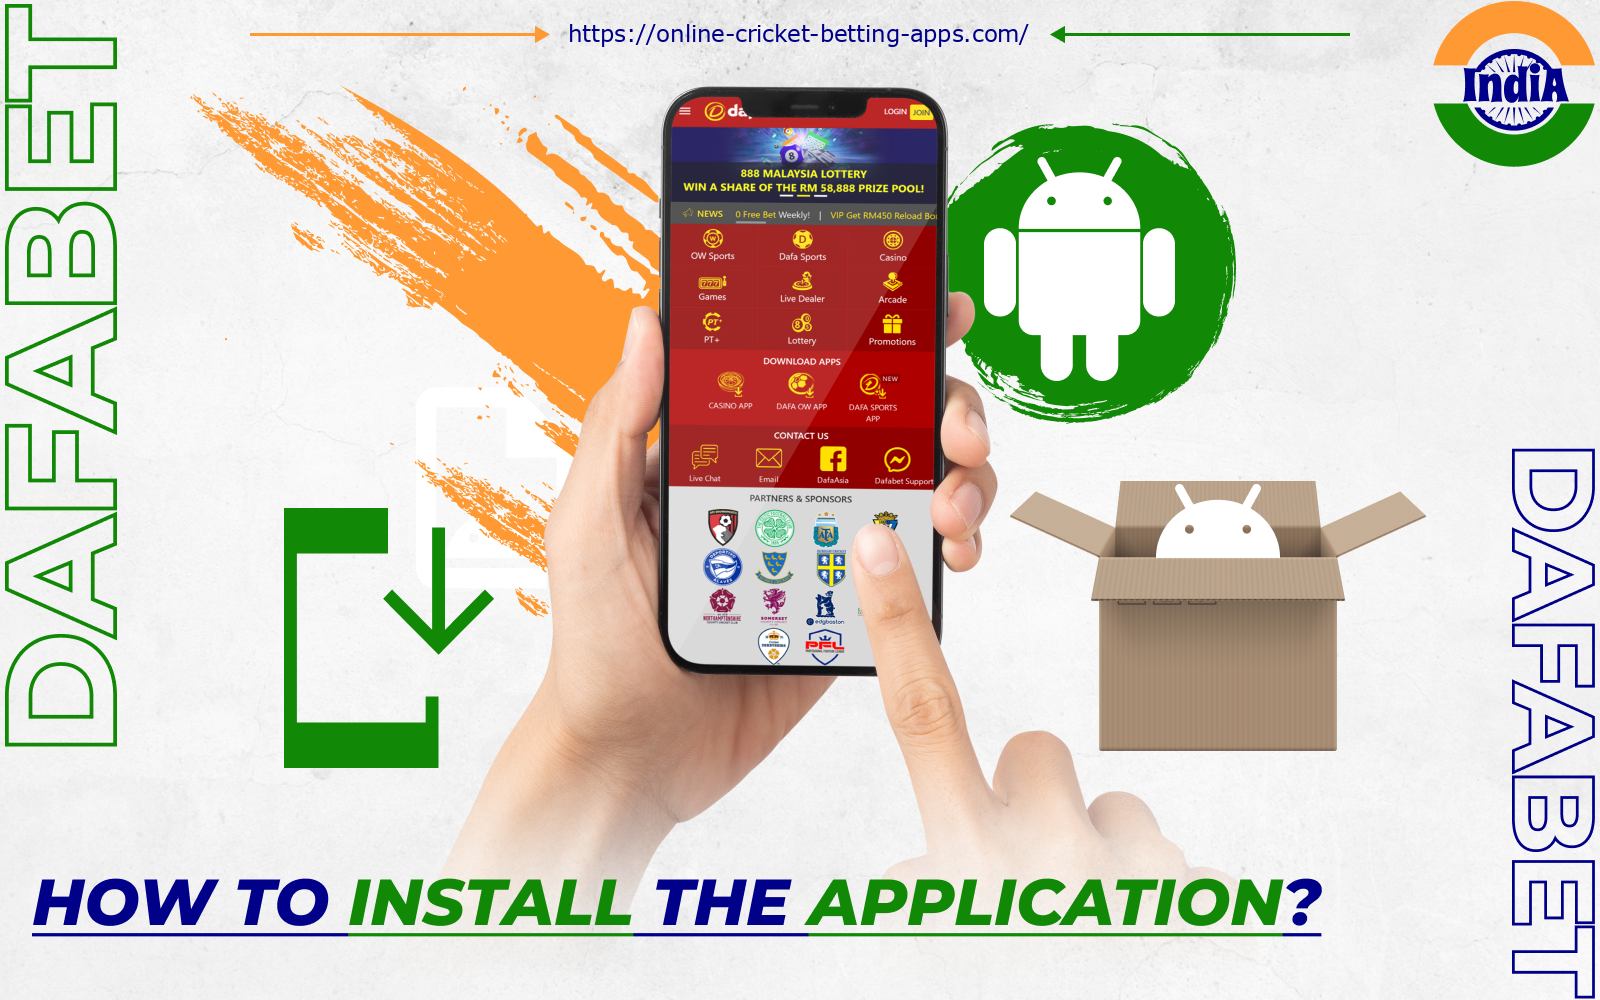 Once the Dafabet APK file is downloaded, players from India can proceed to install the app on their smartphone